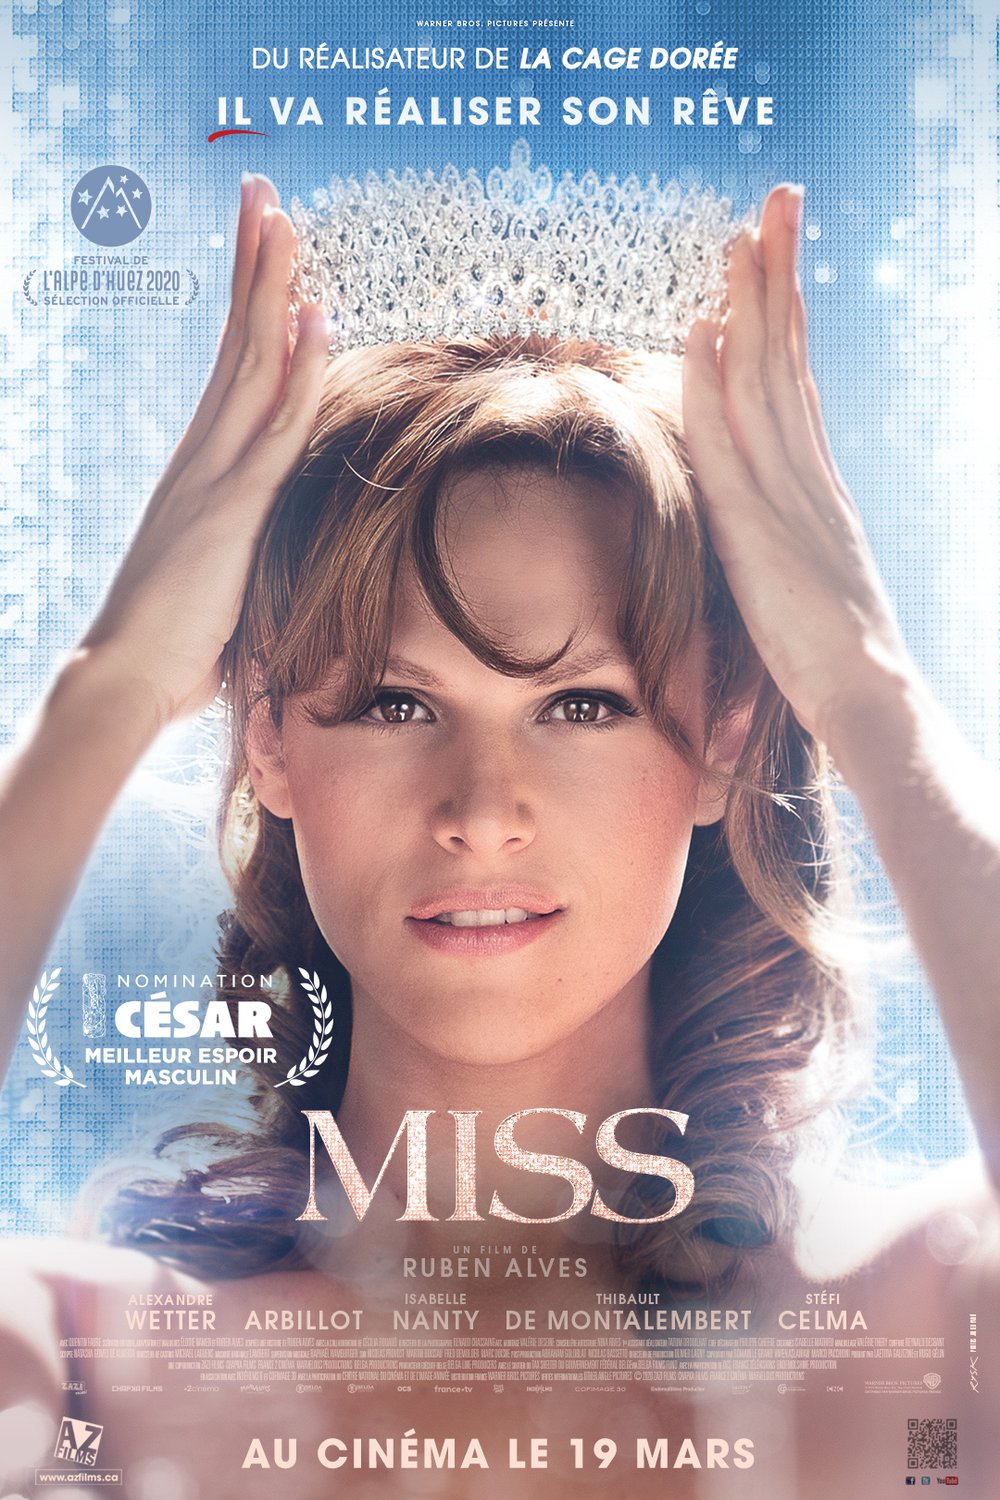 Poster of the movie Miss